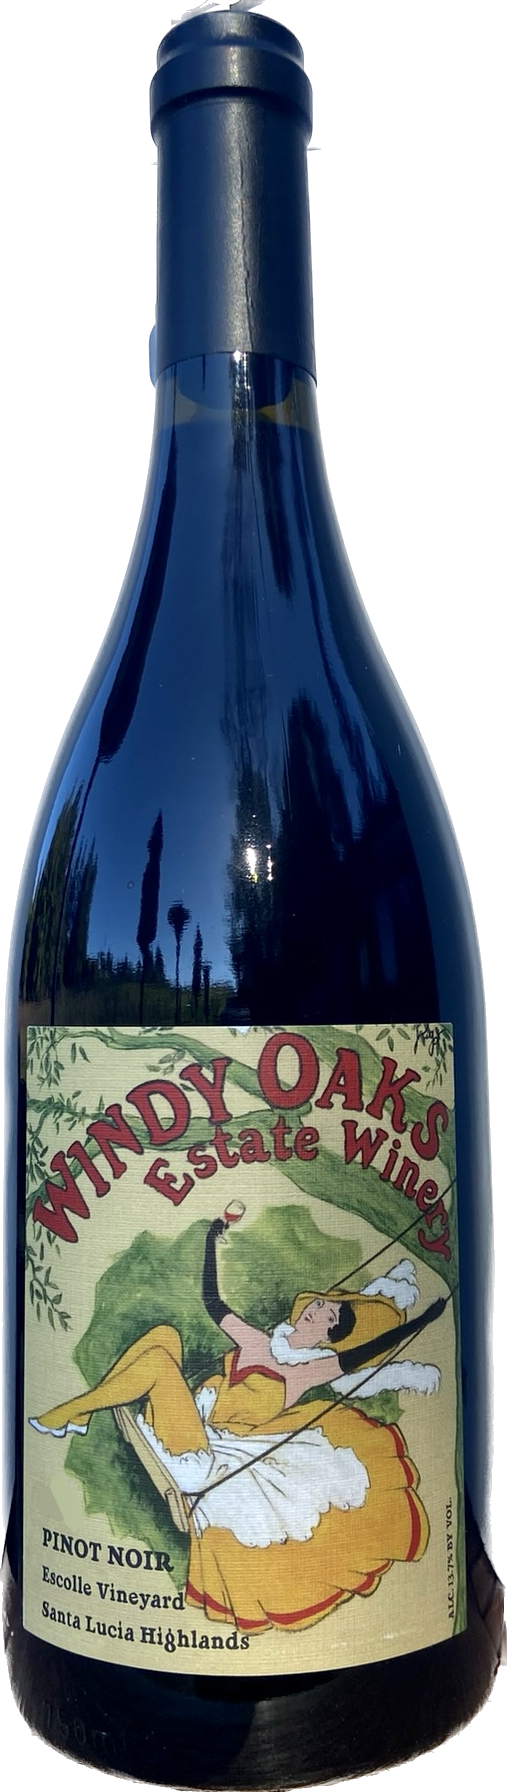 Product Image for 2018 Pinot Noir, Santa Lucia Highlands